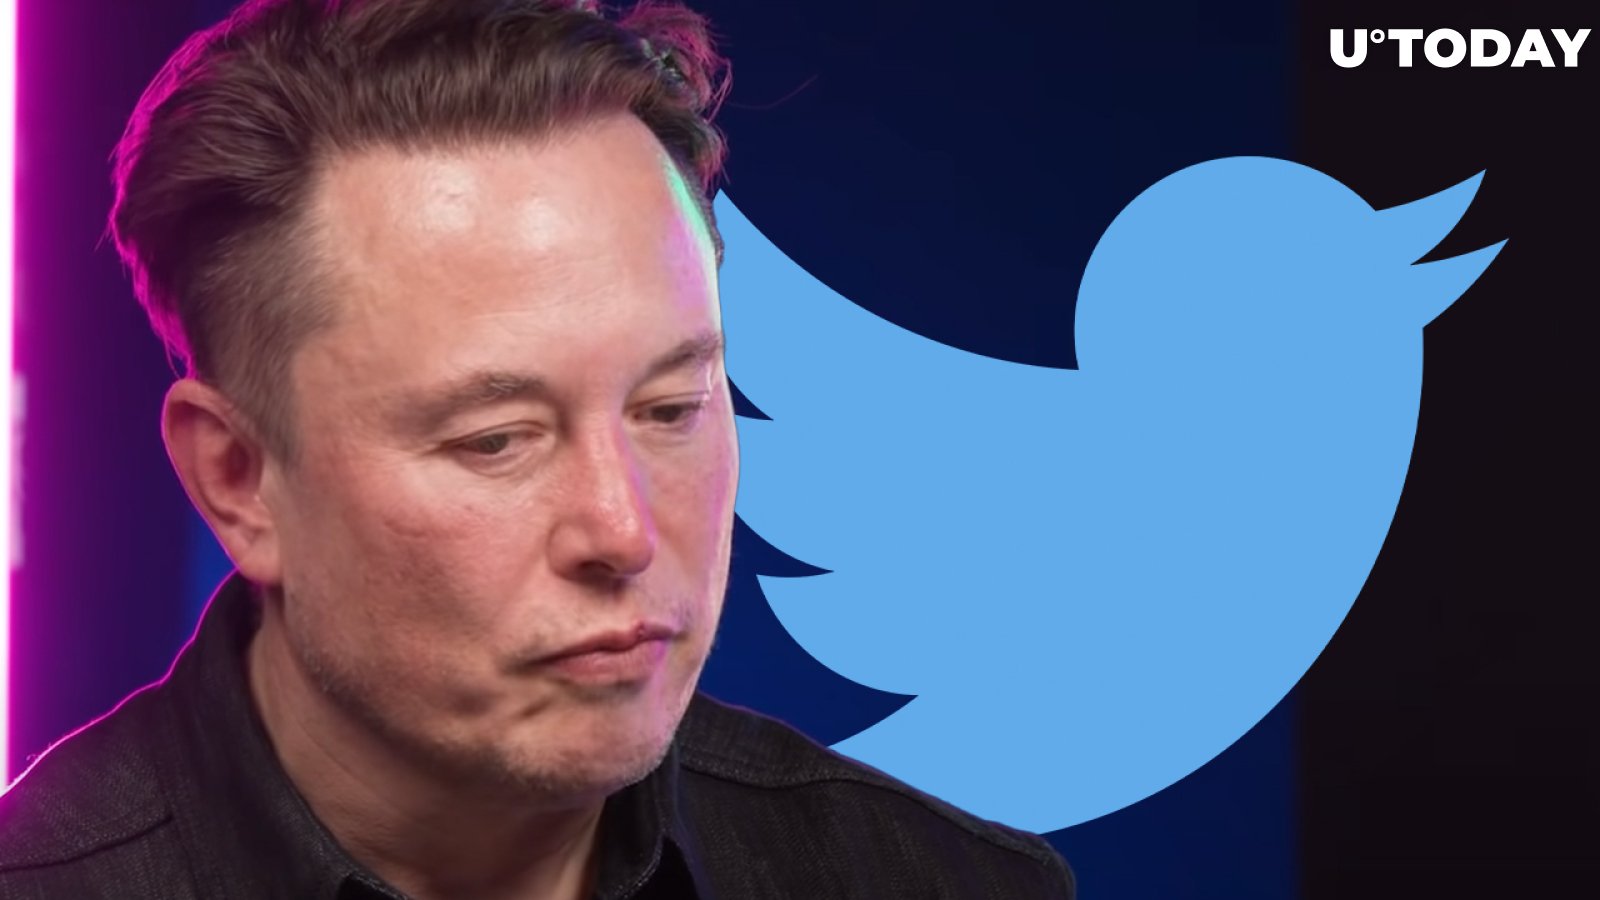 Ripple Exec Says Elon Musk Will Keep Making People "Dumber" About Freedom of Speech